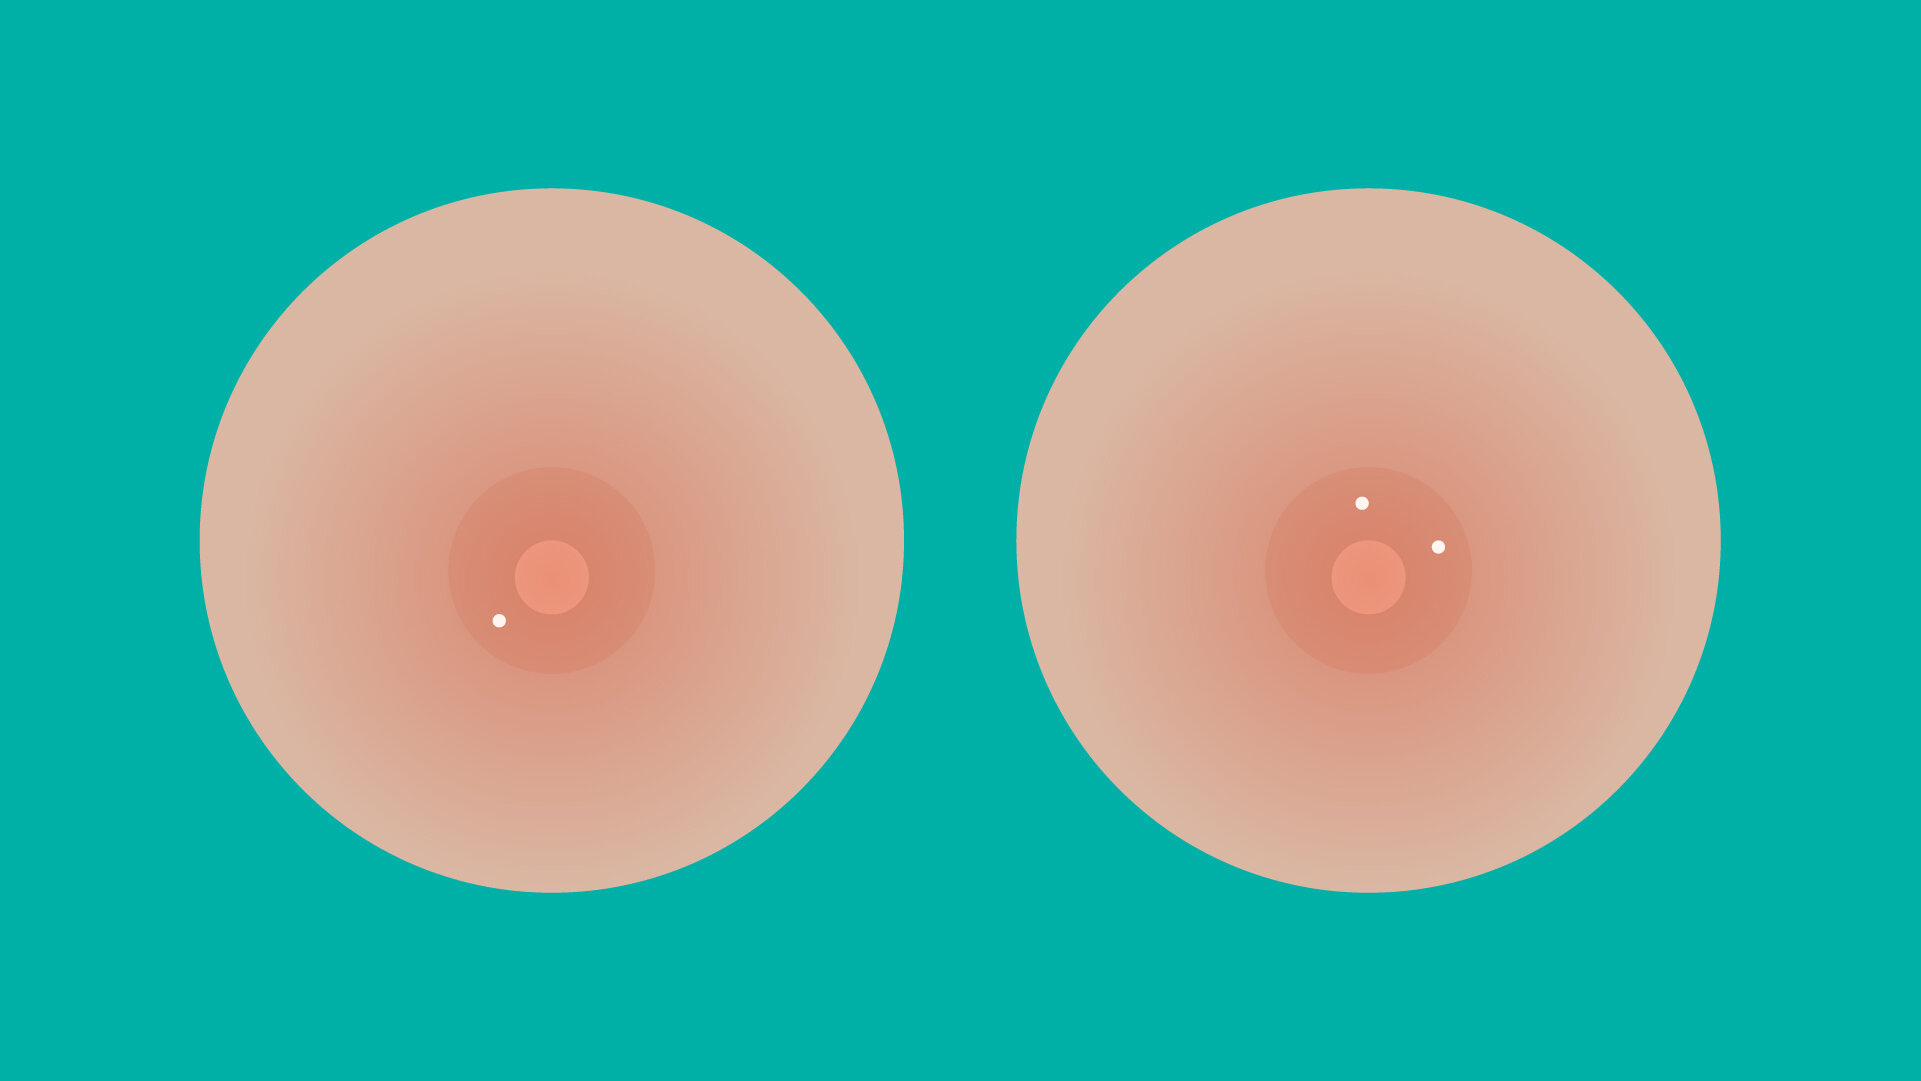 Mamava - Chafed and tender nipples are a common problem